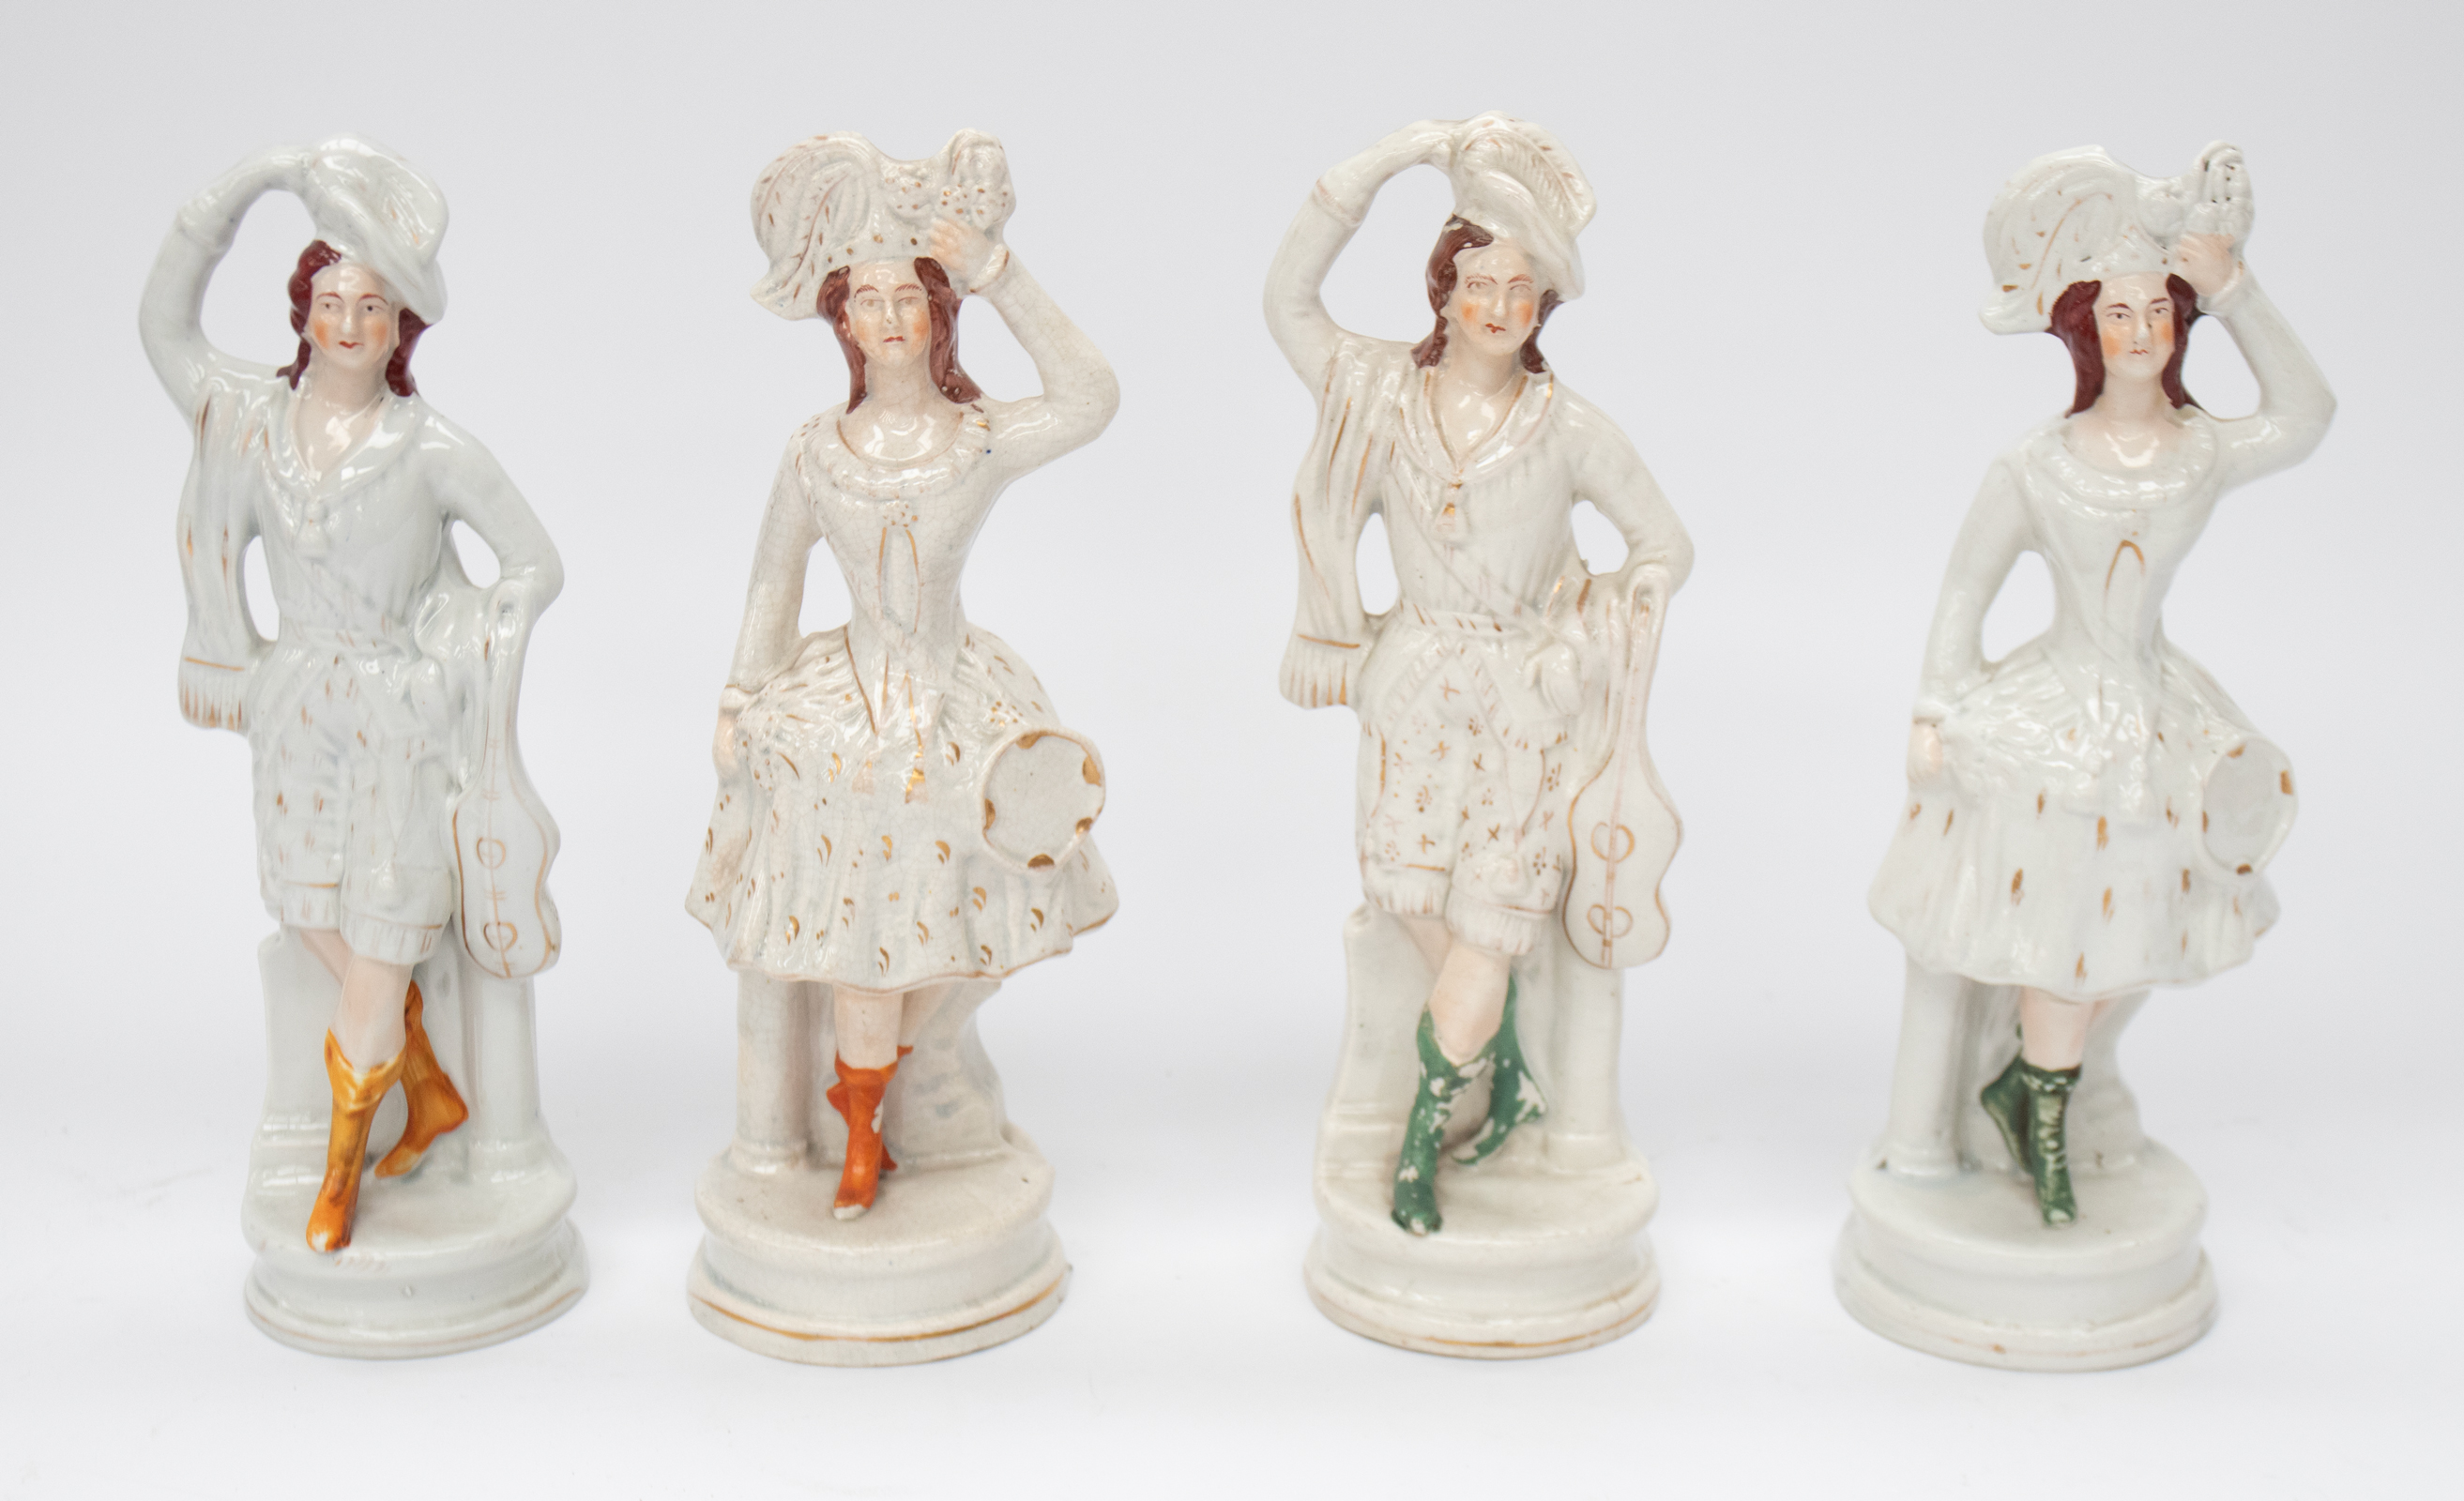 Four similar Staffordshire figures, all Ladies in white dress and hand on hats. Some cracking, wear,